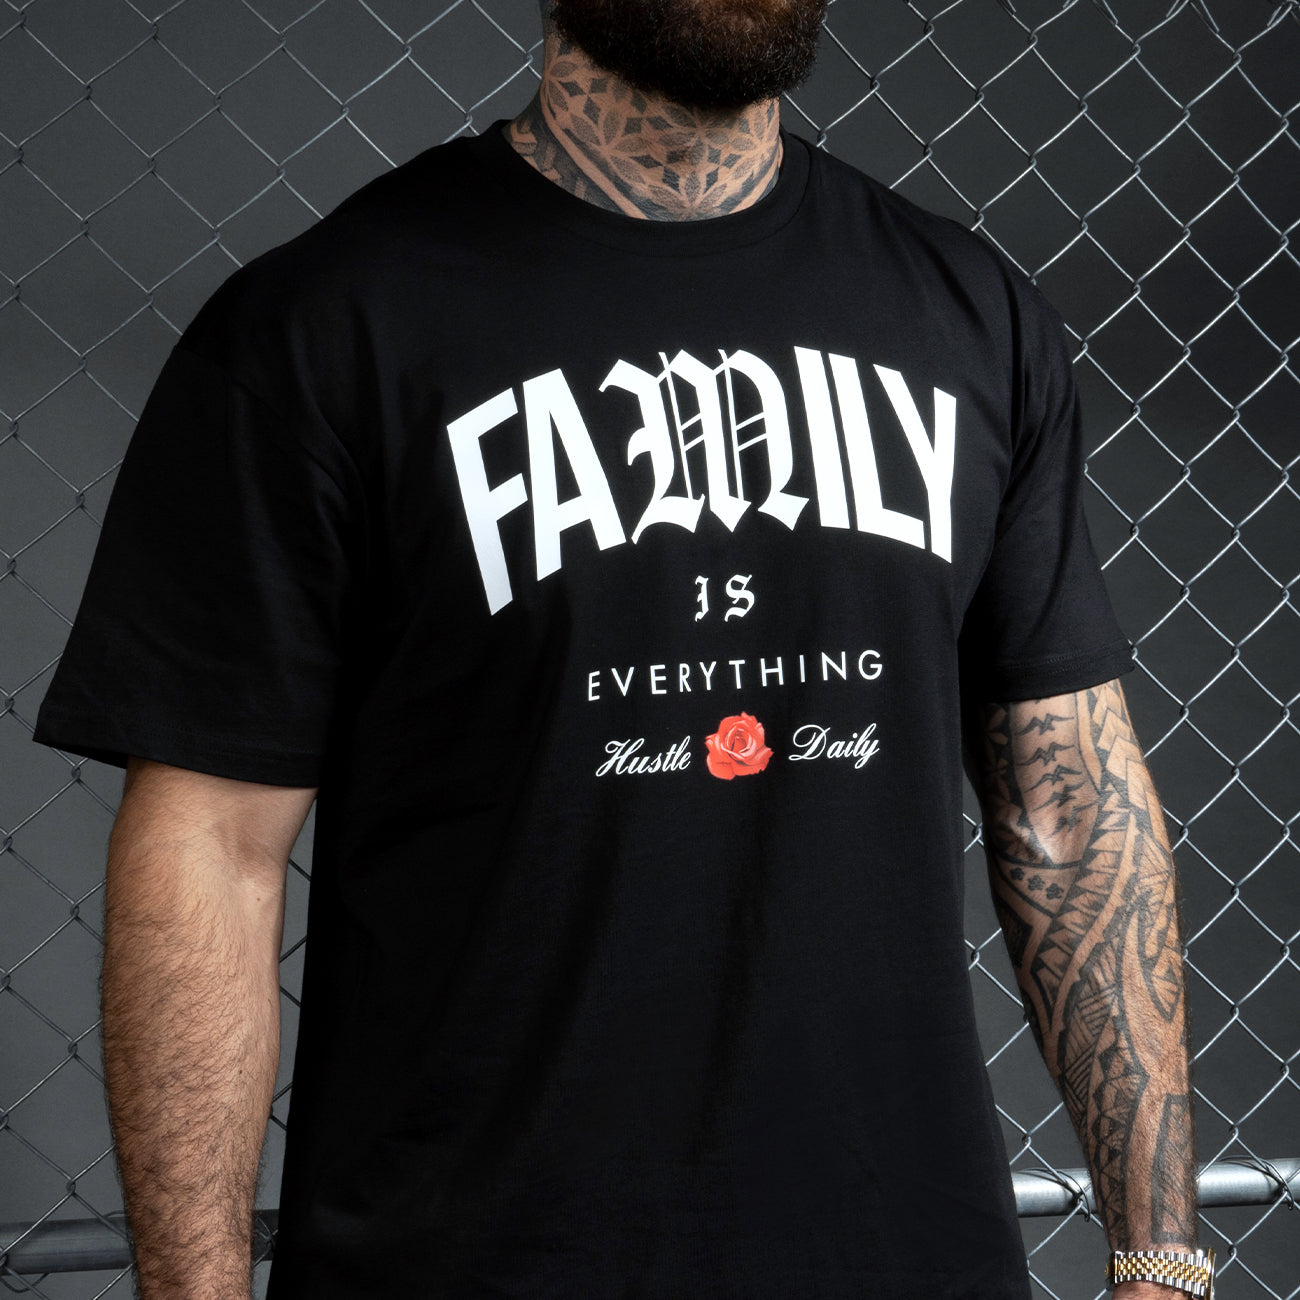 Family is Everything Tee